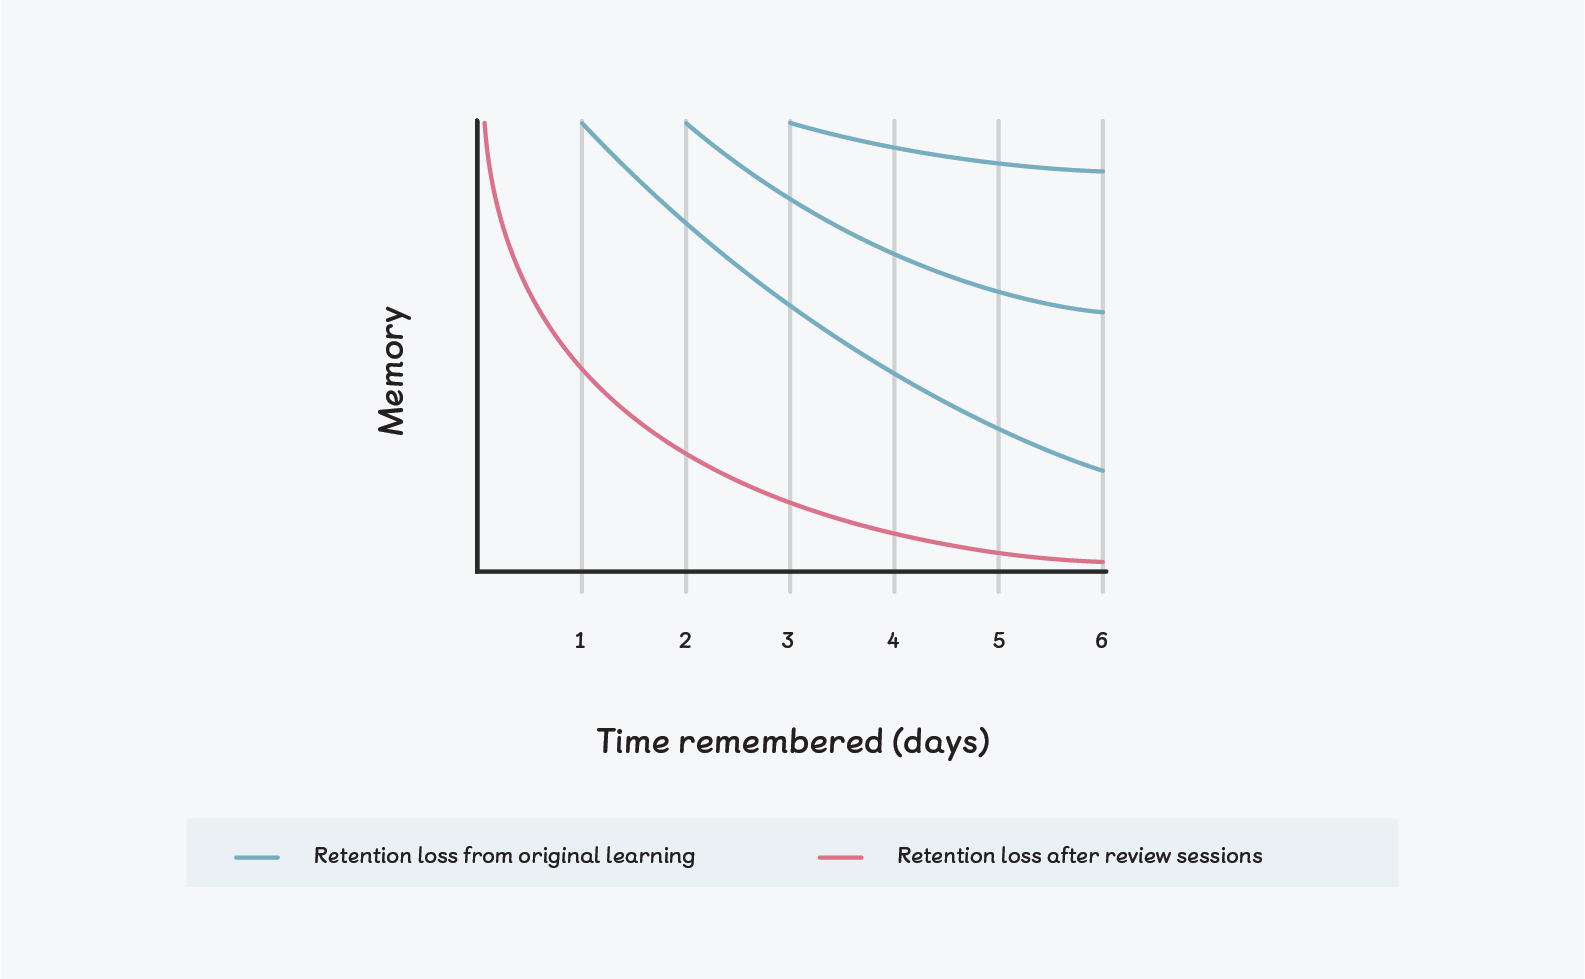 The concept of over-learning: when learners regularly revisit topics, the rate of retention increases, represented as a graph